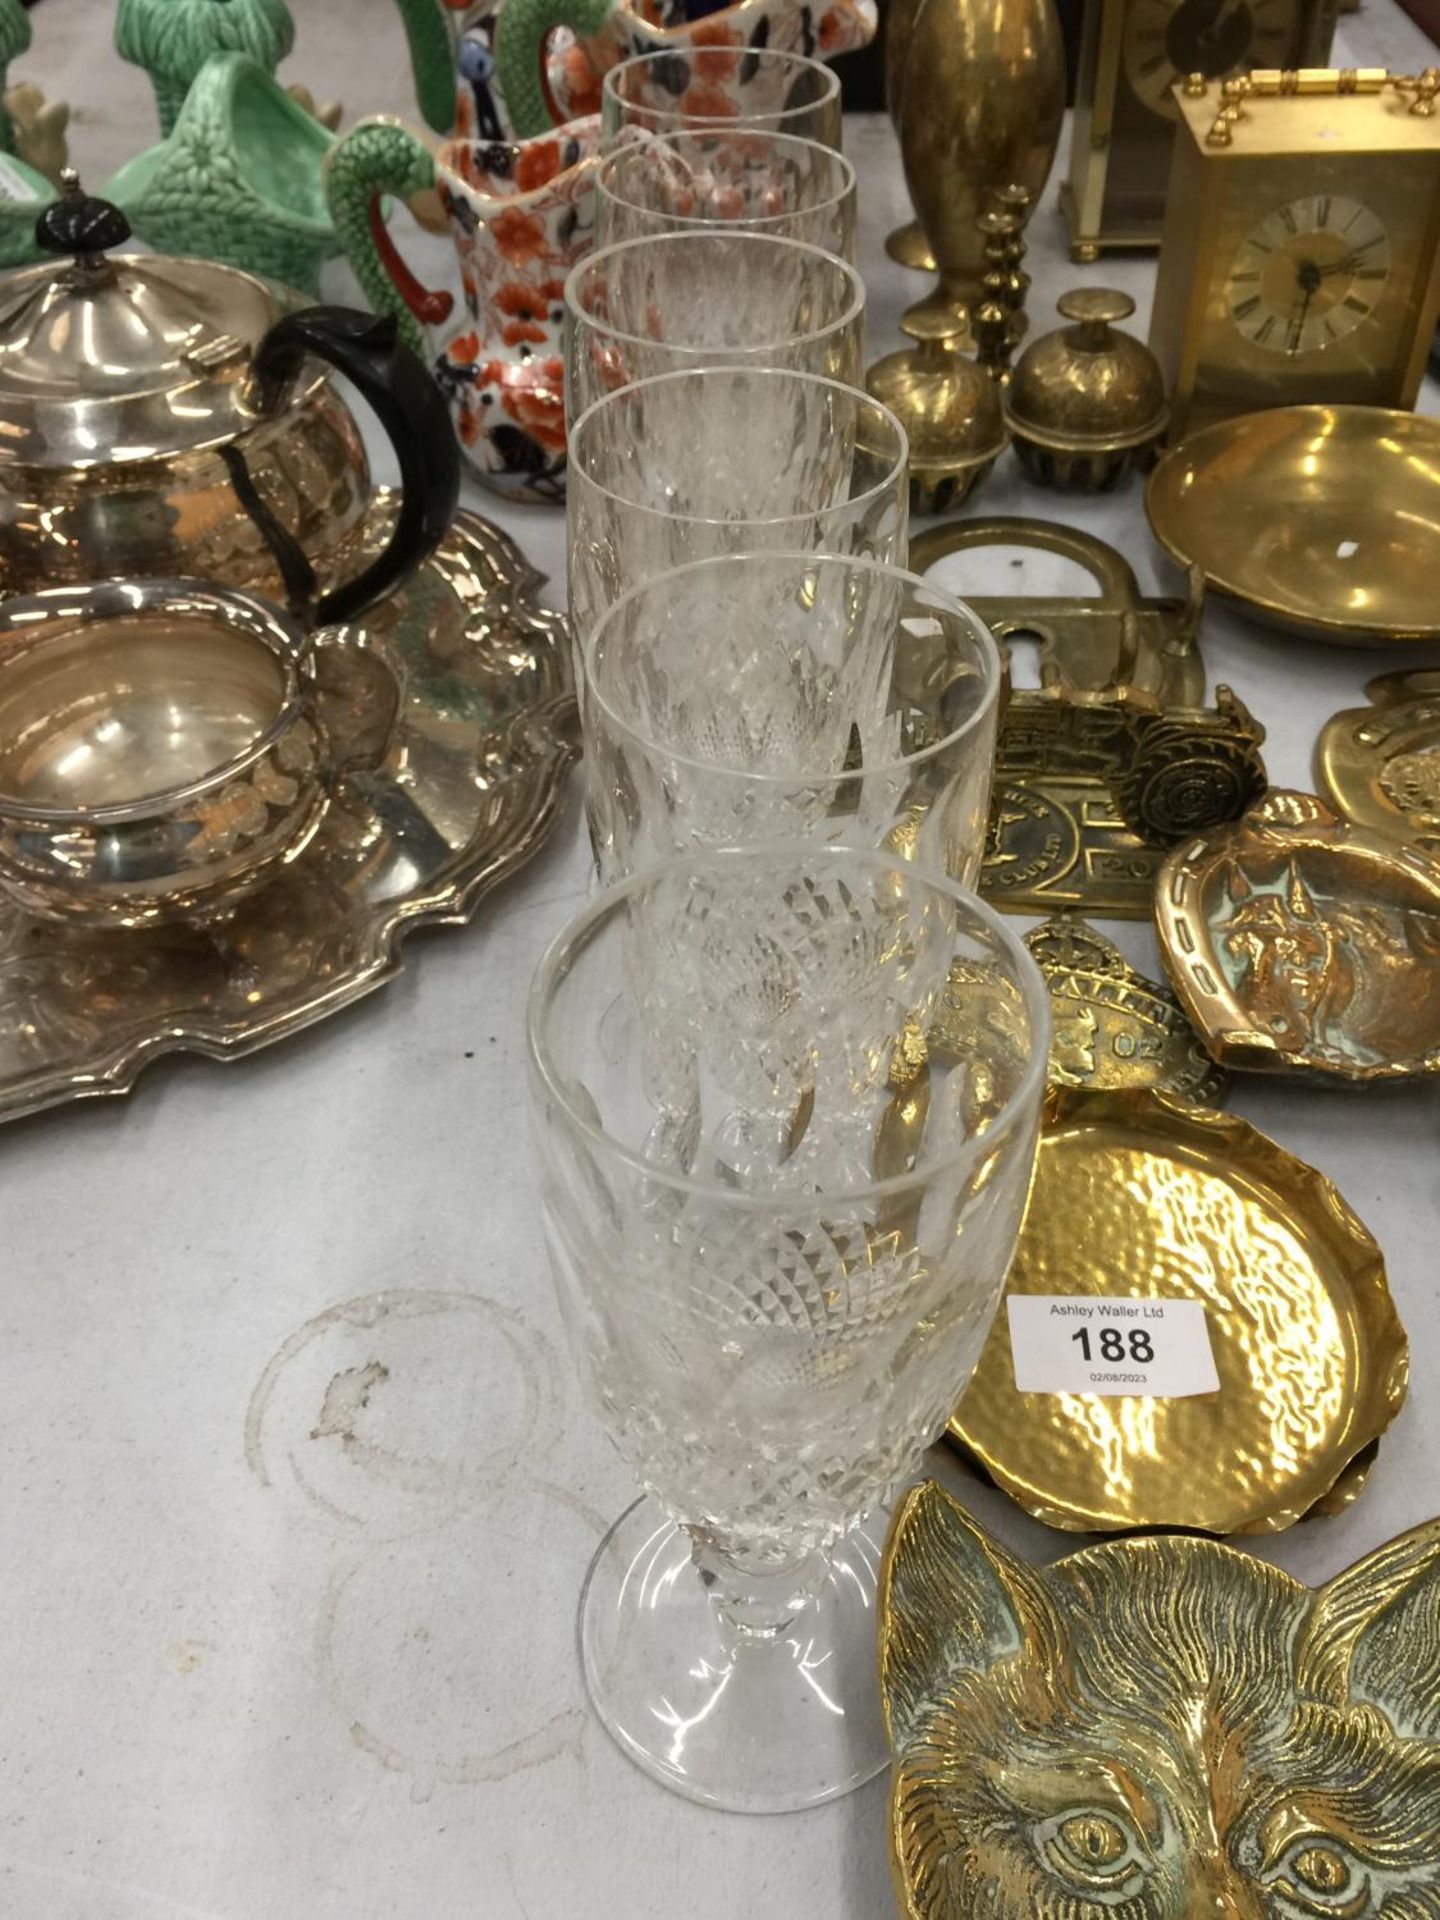 SIX WATERFORD CRYSTAL WINE GLASSES